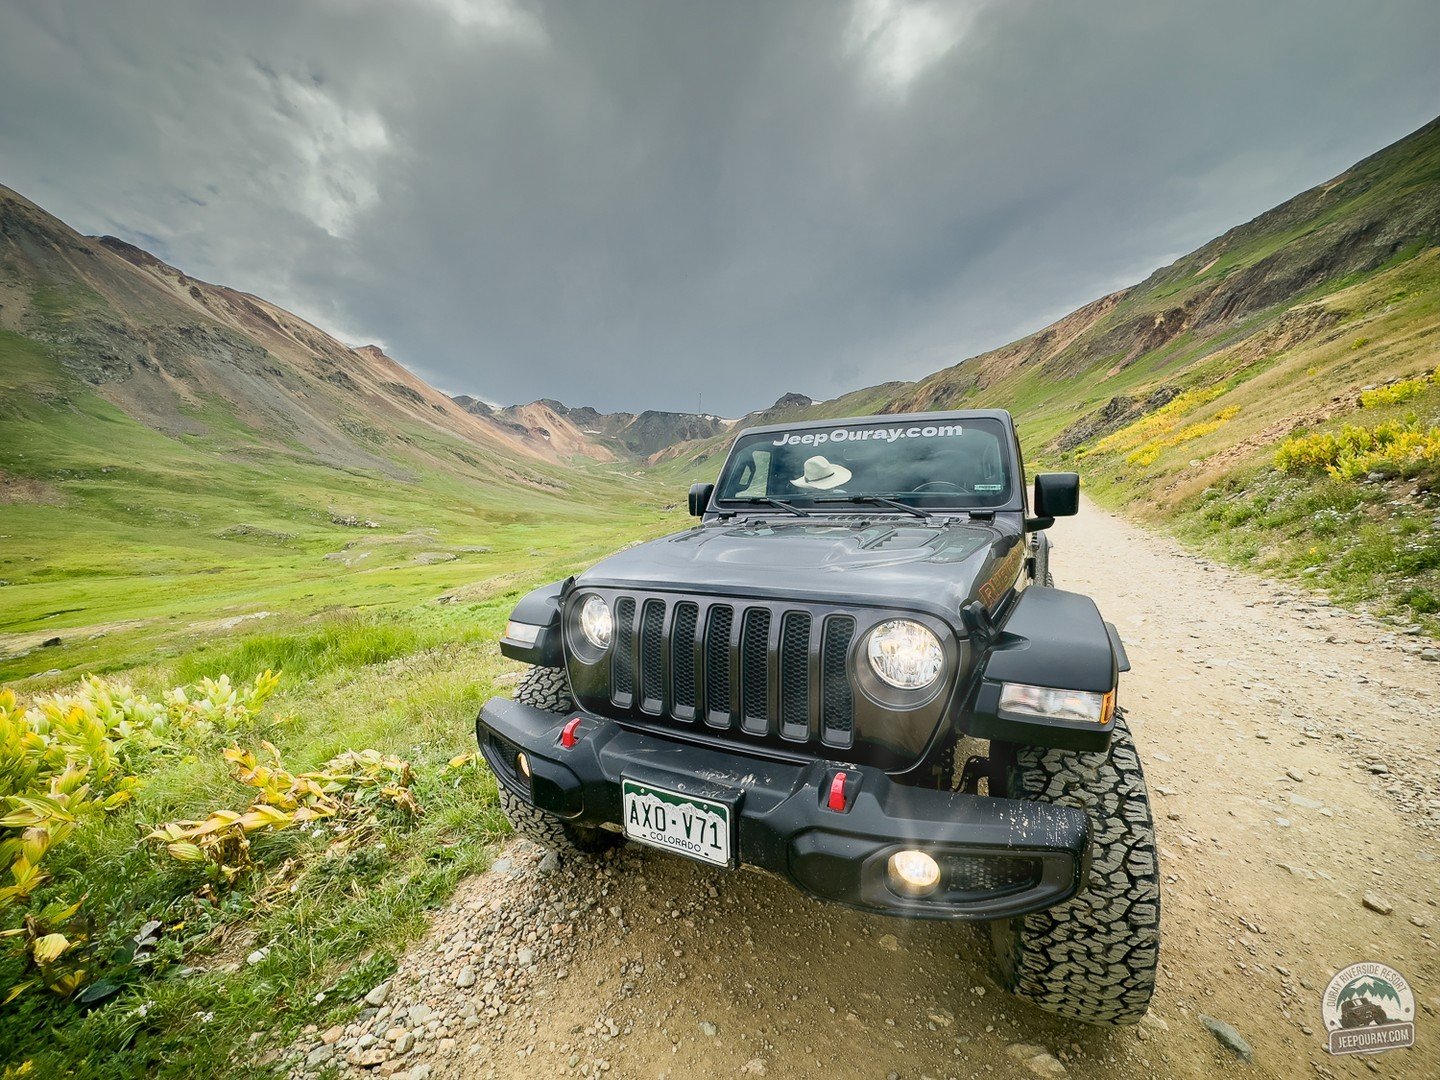 A Jeep Ouray favorite trail and one of the most popular on the Mines and Ghost Towns Loop.  We are running a special for May on our new Rubicons. $249 per day until May 31st. 

https://www.ourayriversideresort.com/jeepouray

 #mines #jeep #explorer #